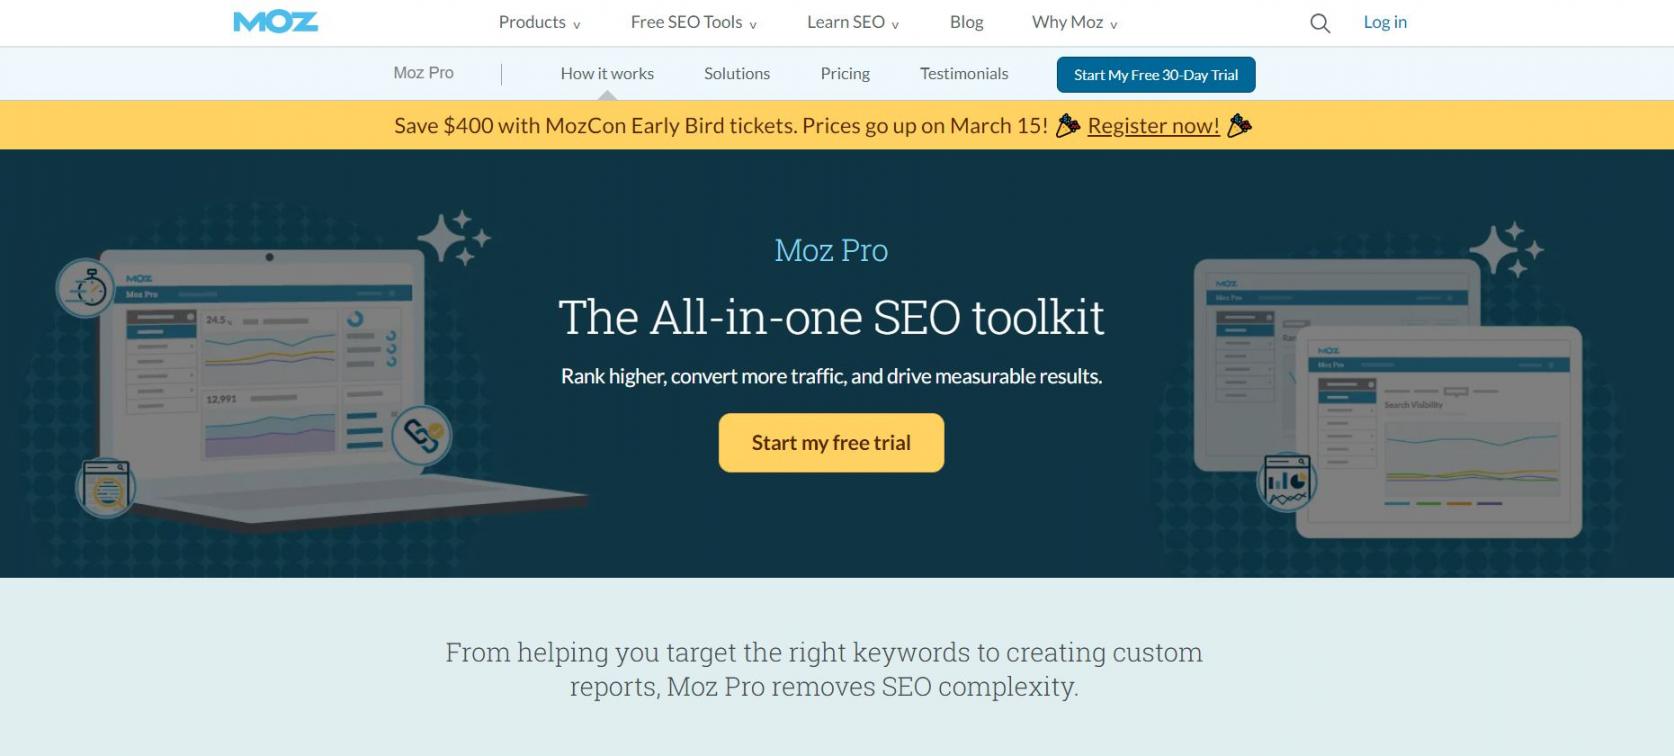 Moz Pro home page